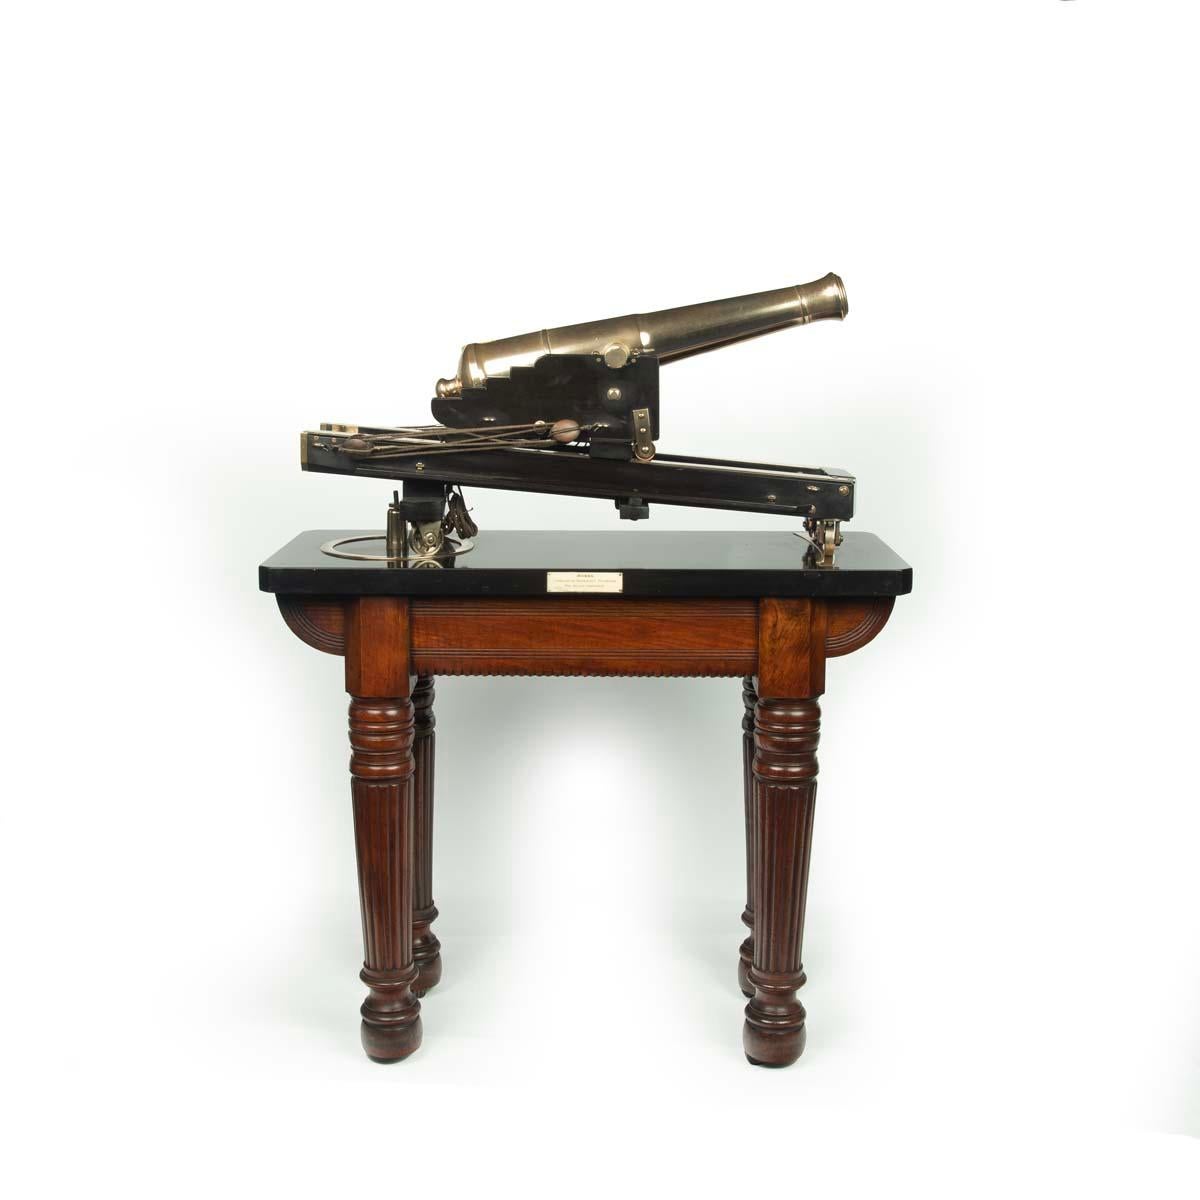 A demonstration or museum model of a civil defence traversing cannon. This bronze scale model of a defence cannon rests on a solid ebony carriage with working blocks and tackle to run the barrel out.  It is set on a Derbyshire black marble base